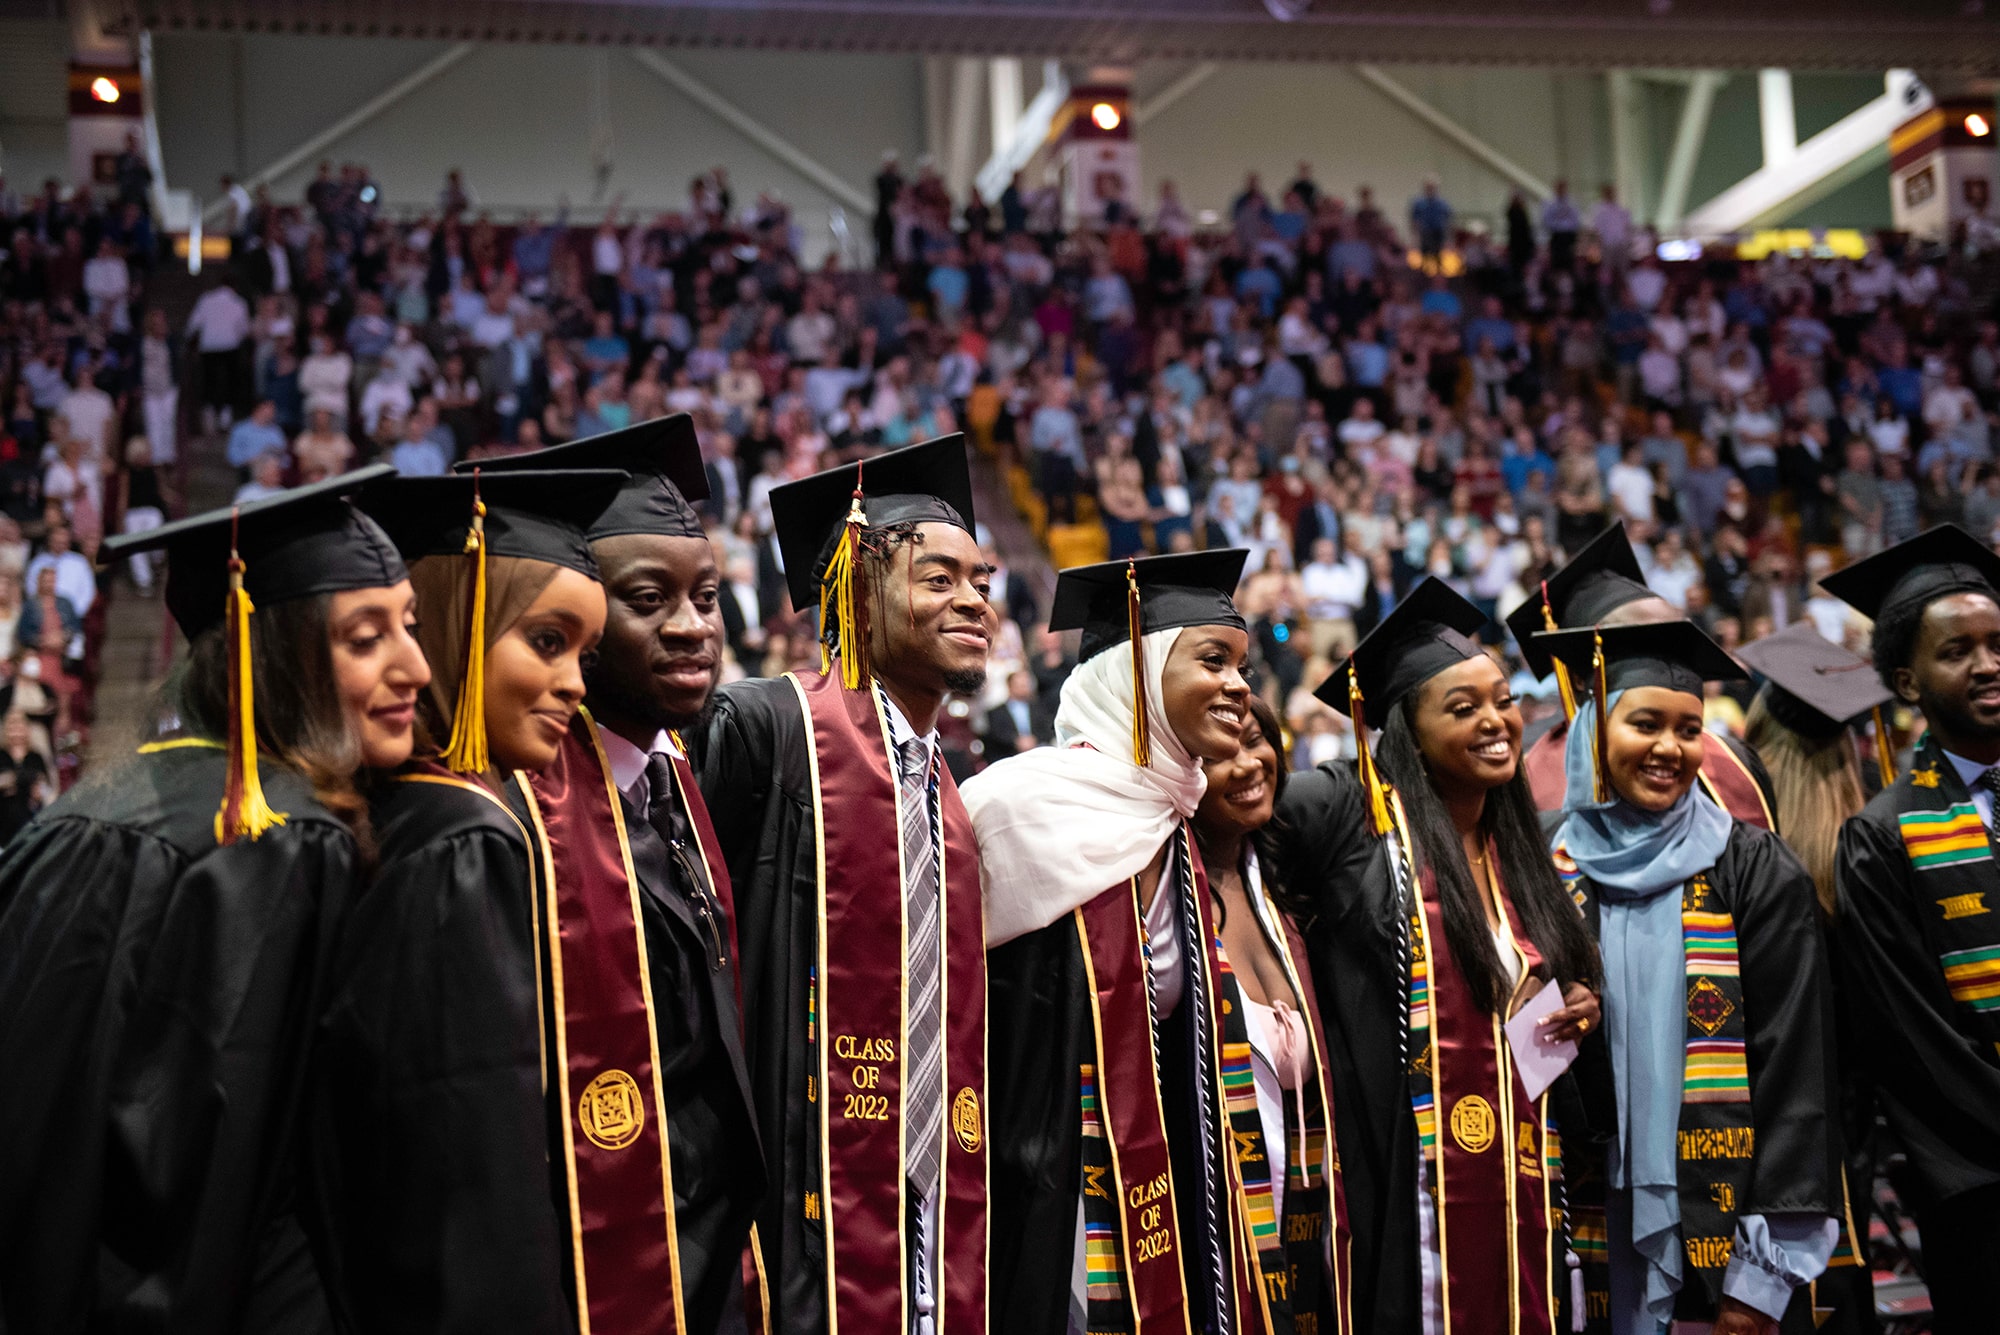 Undergraduate students pose for a photo following the 2022 commencement ceremony